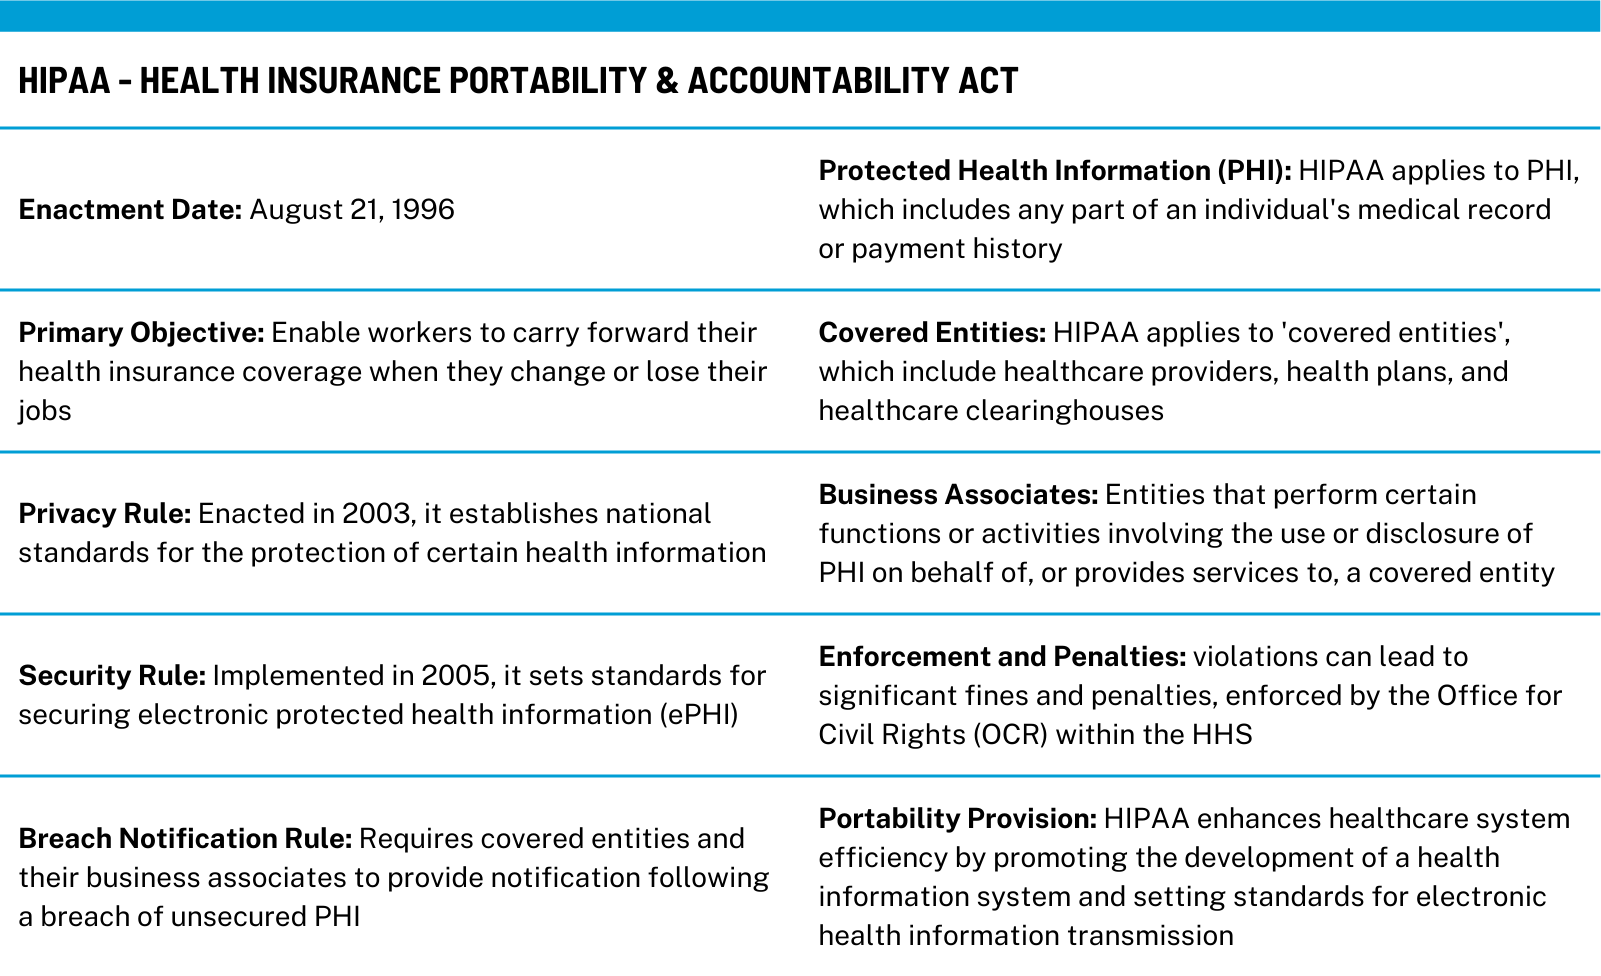 Informative graphic summarizing key aspects of HIPAA, including enactment date, primary objective, privacy and security rules, PHI, covered entities, business associates, enforcement, penalties, breach notification, and portability provision, essential for healthcare software development compliance.